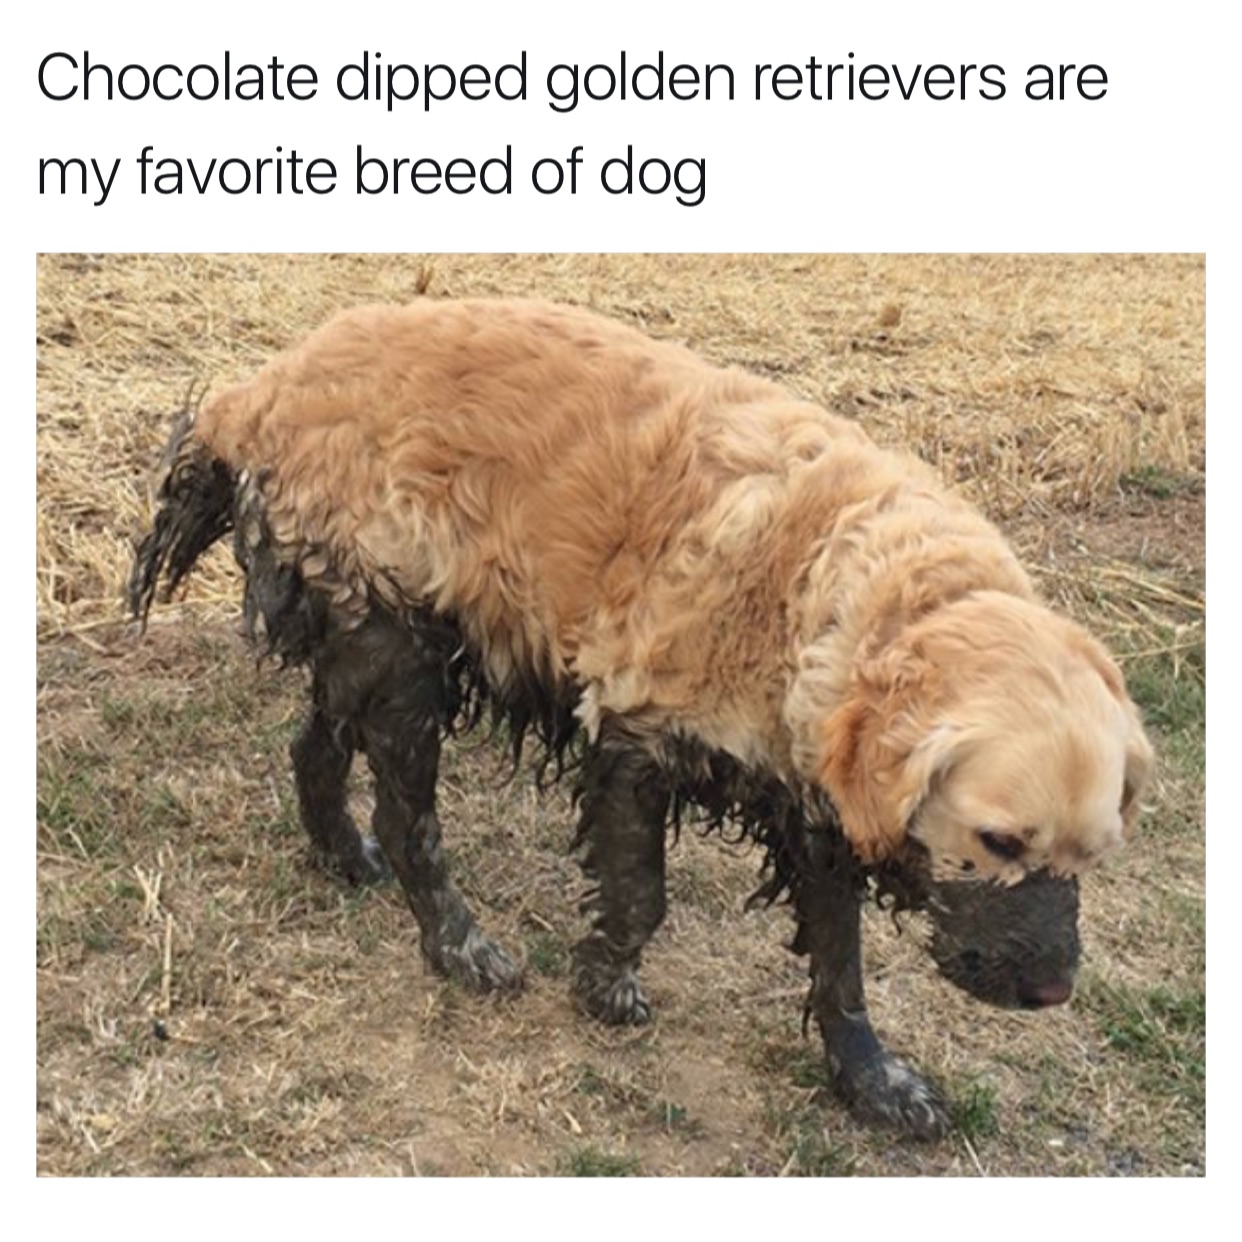 memes - dogs playing - Chocolate dipped golden retrievers are my favorite breed of dog